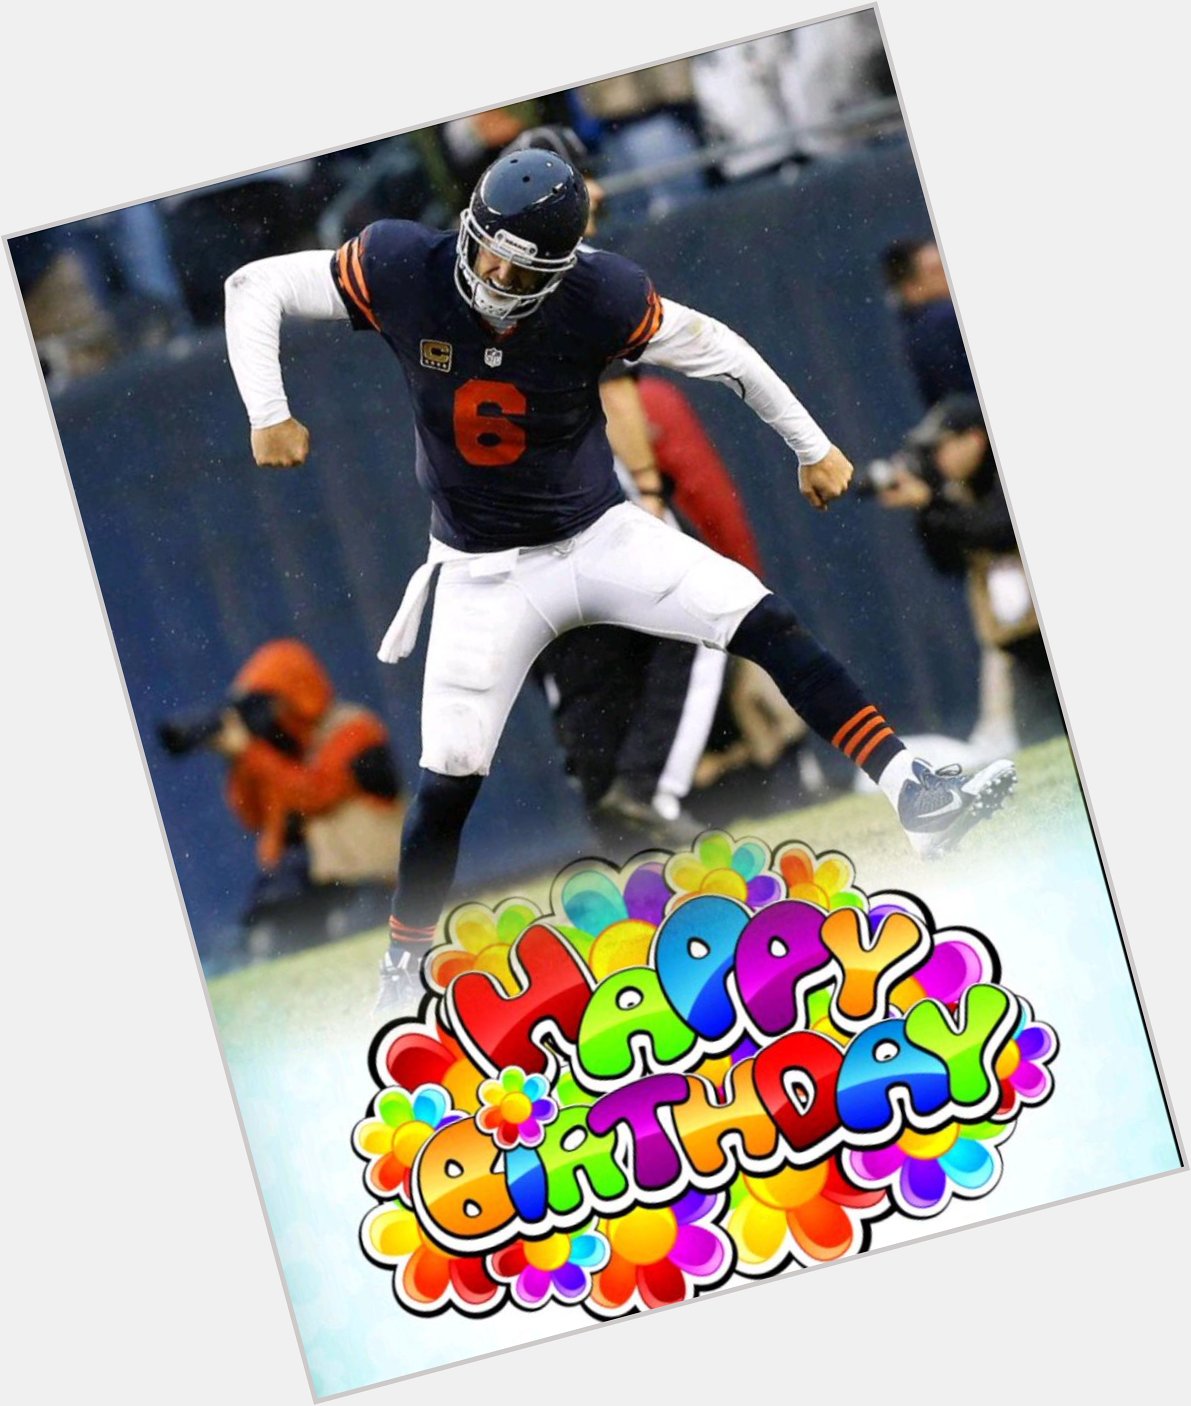 Happy Birthday to Jay Cutler! Over his career he has thrown 183 touchdowns, 130 INTs and a 85.3 passer rating. 